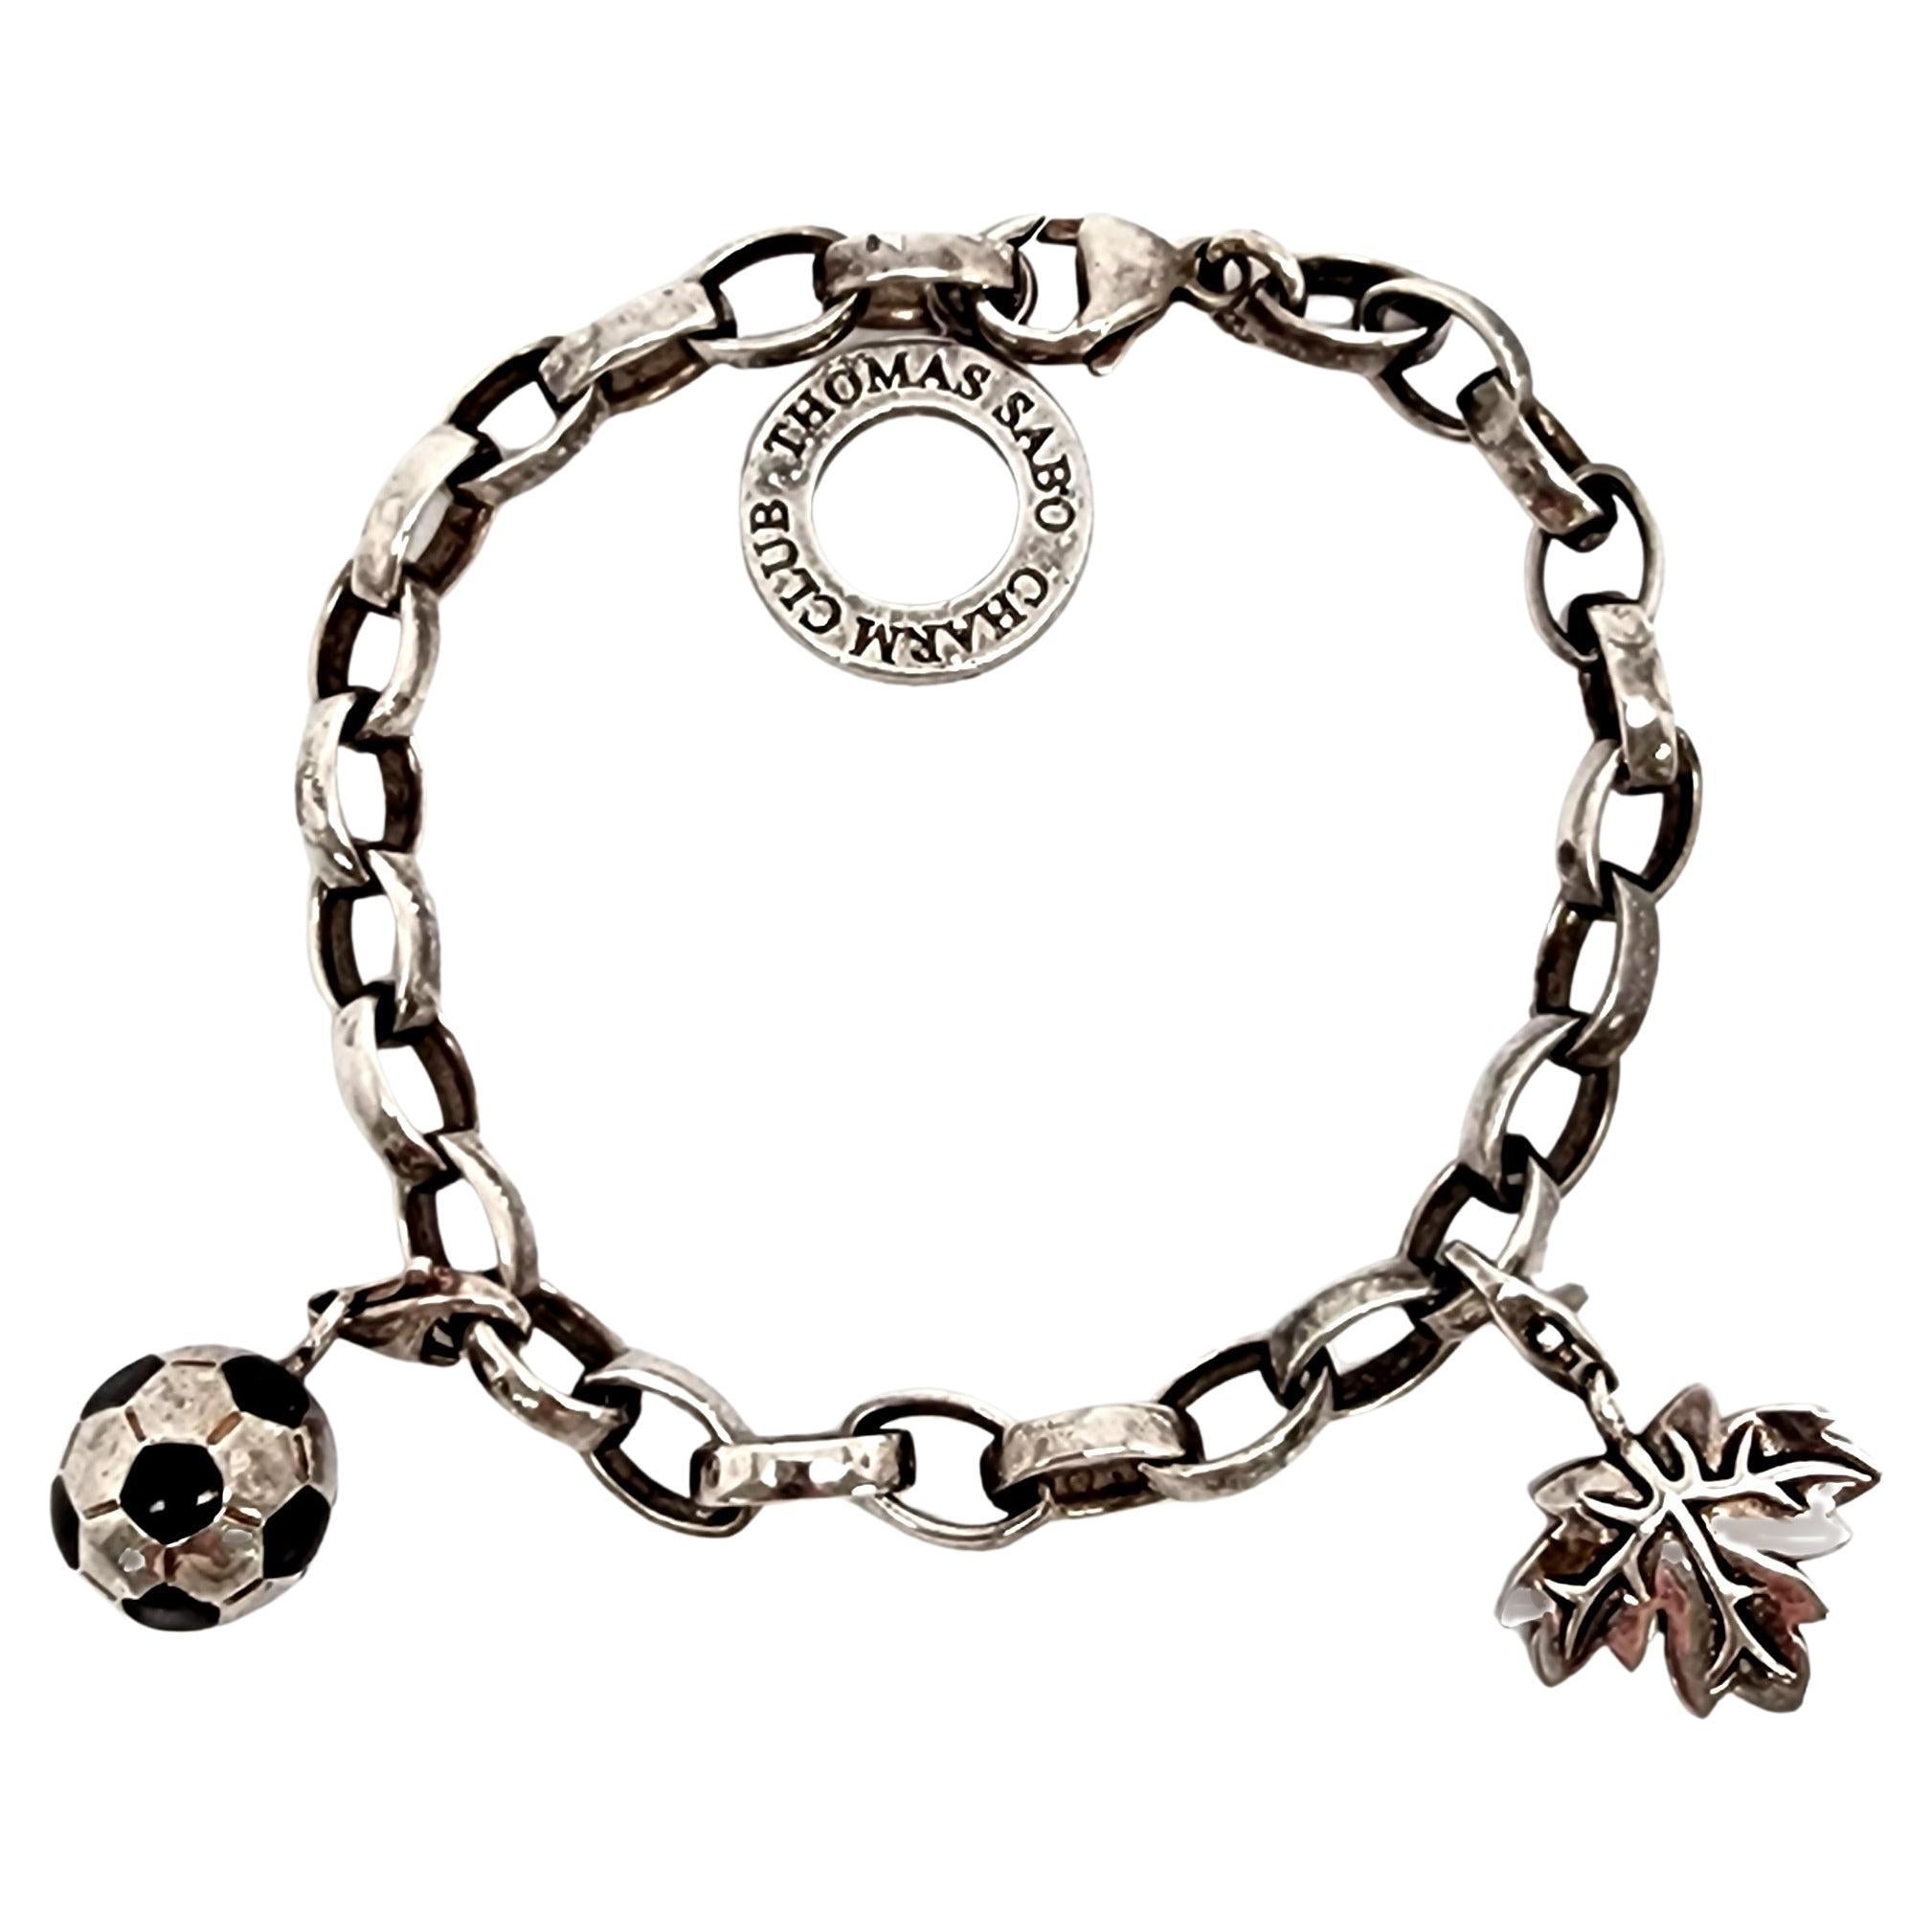 Thomas Sabo Charm Club SS Bracelet with Soccer Ball and Leaf Charms #14459